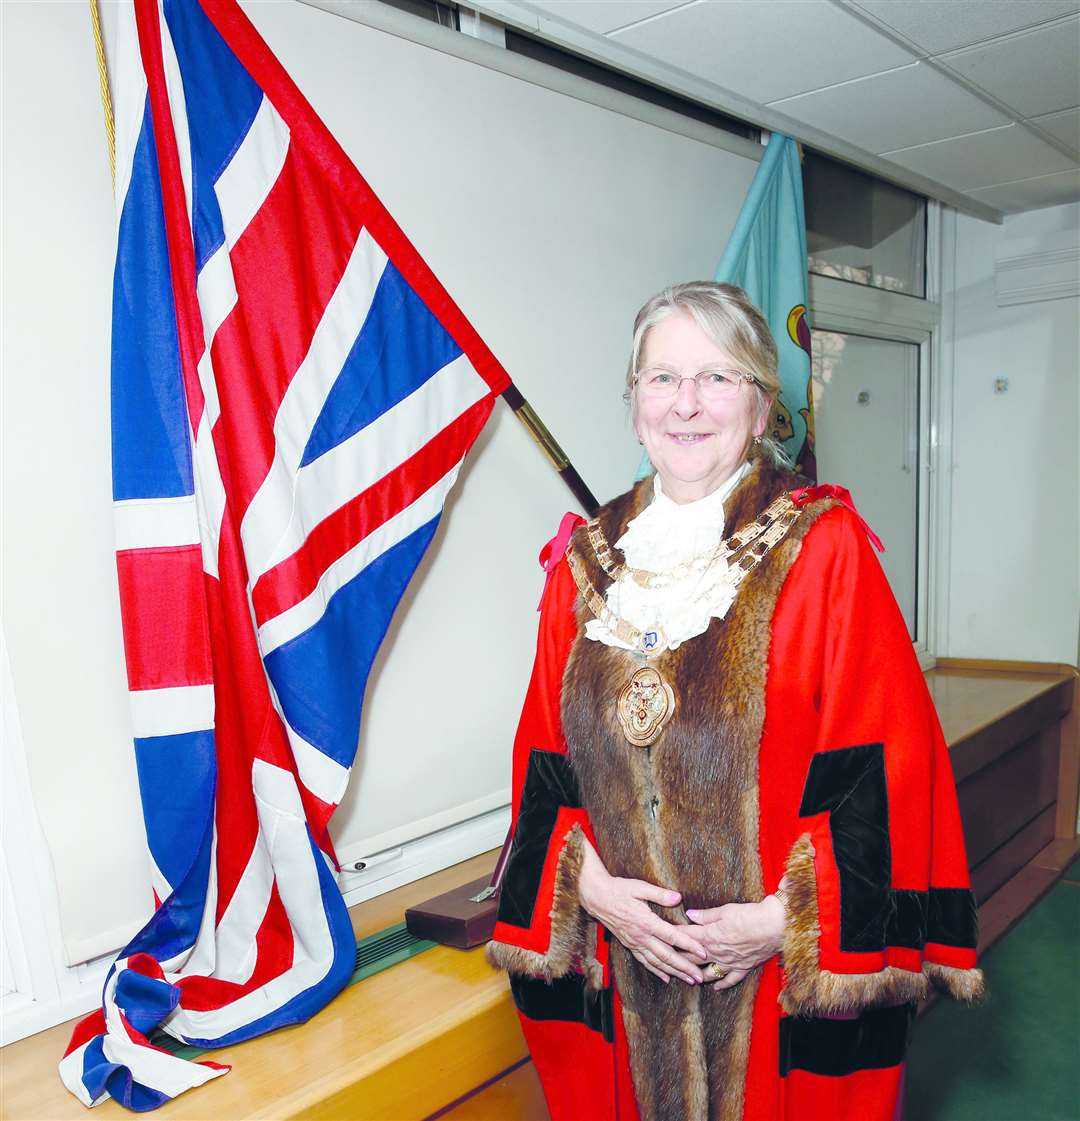 Cllr Rosanna Currans has been appointed as the new Mayor of Dartford